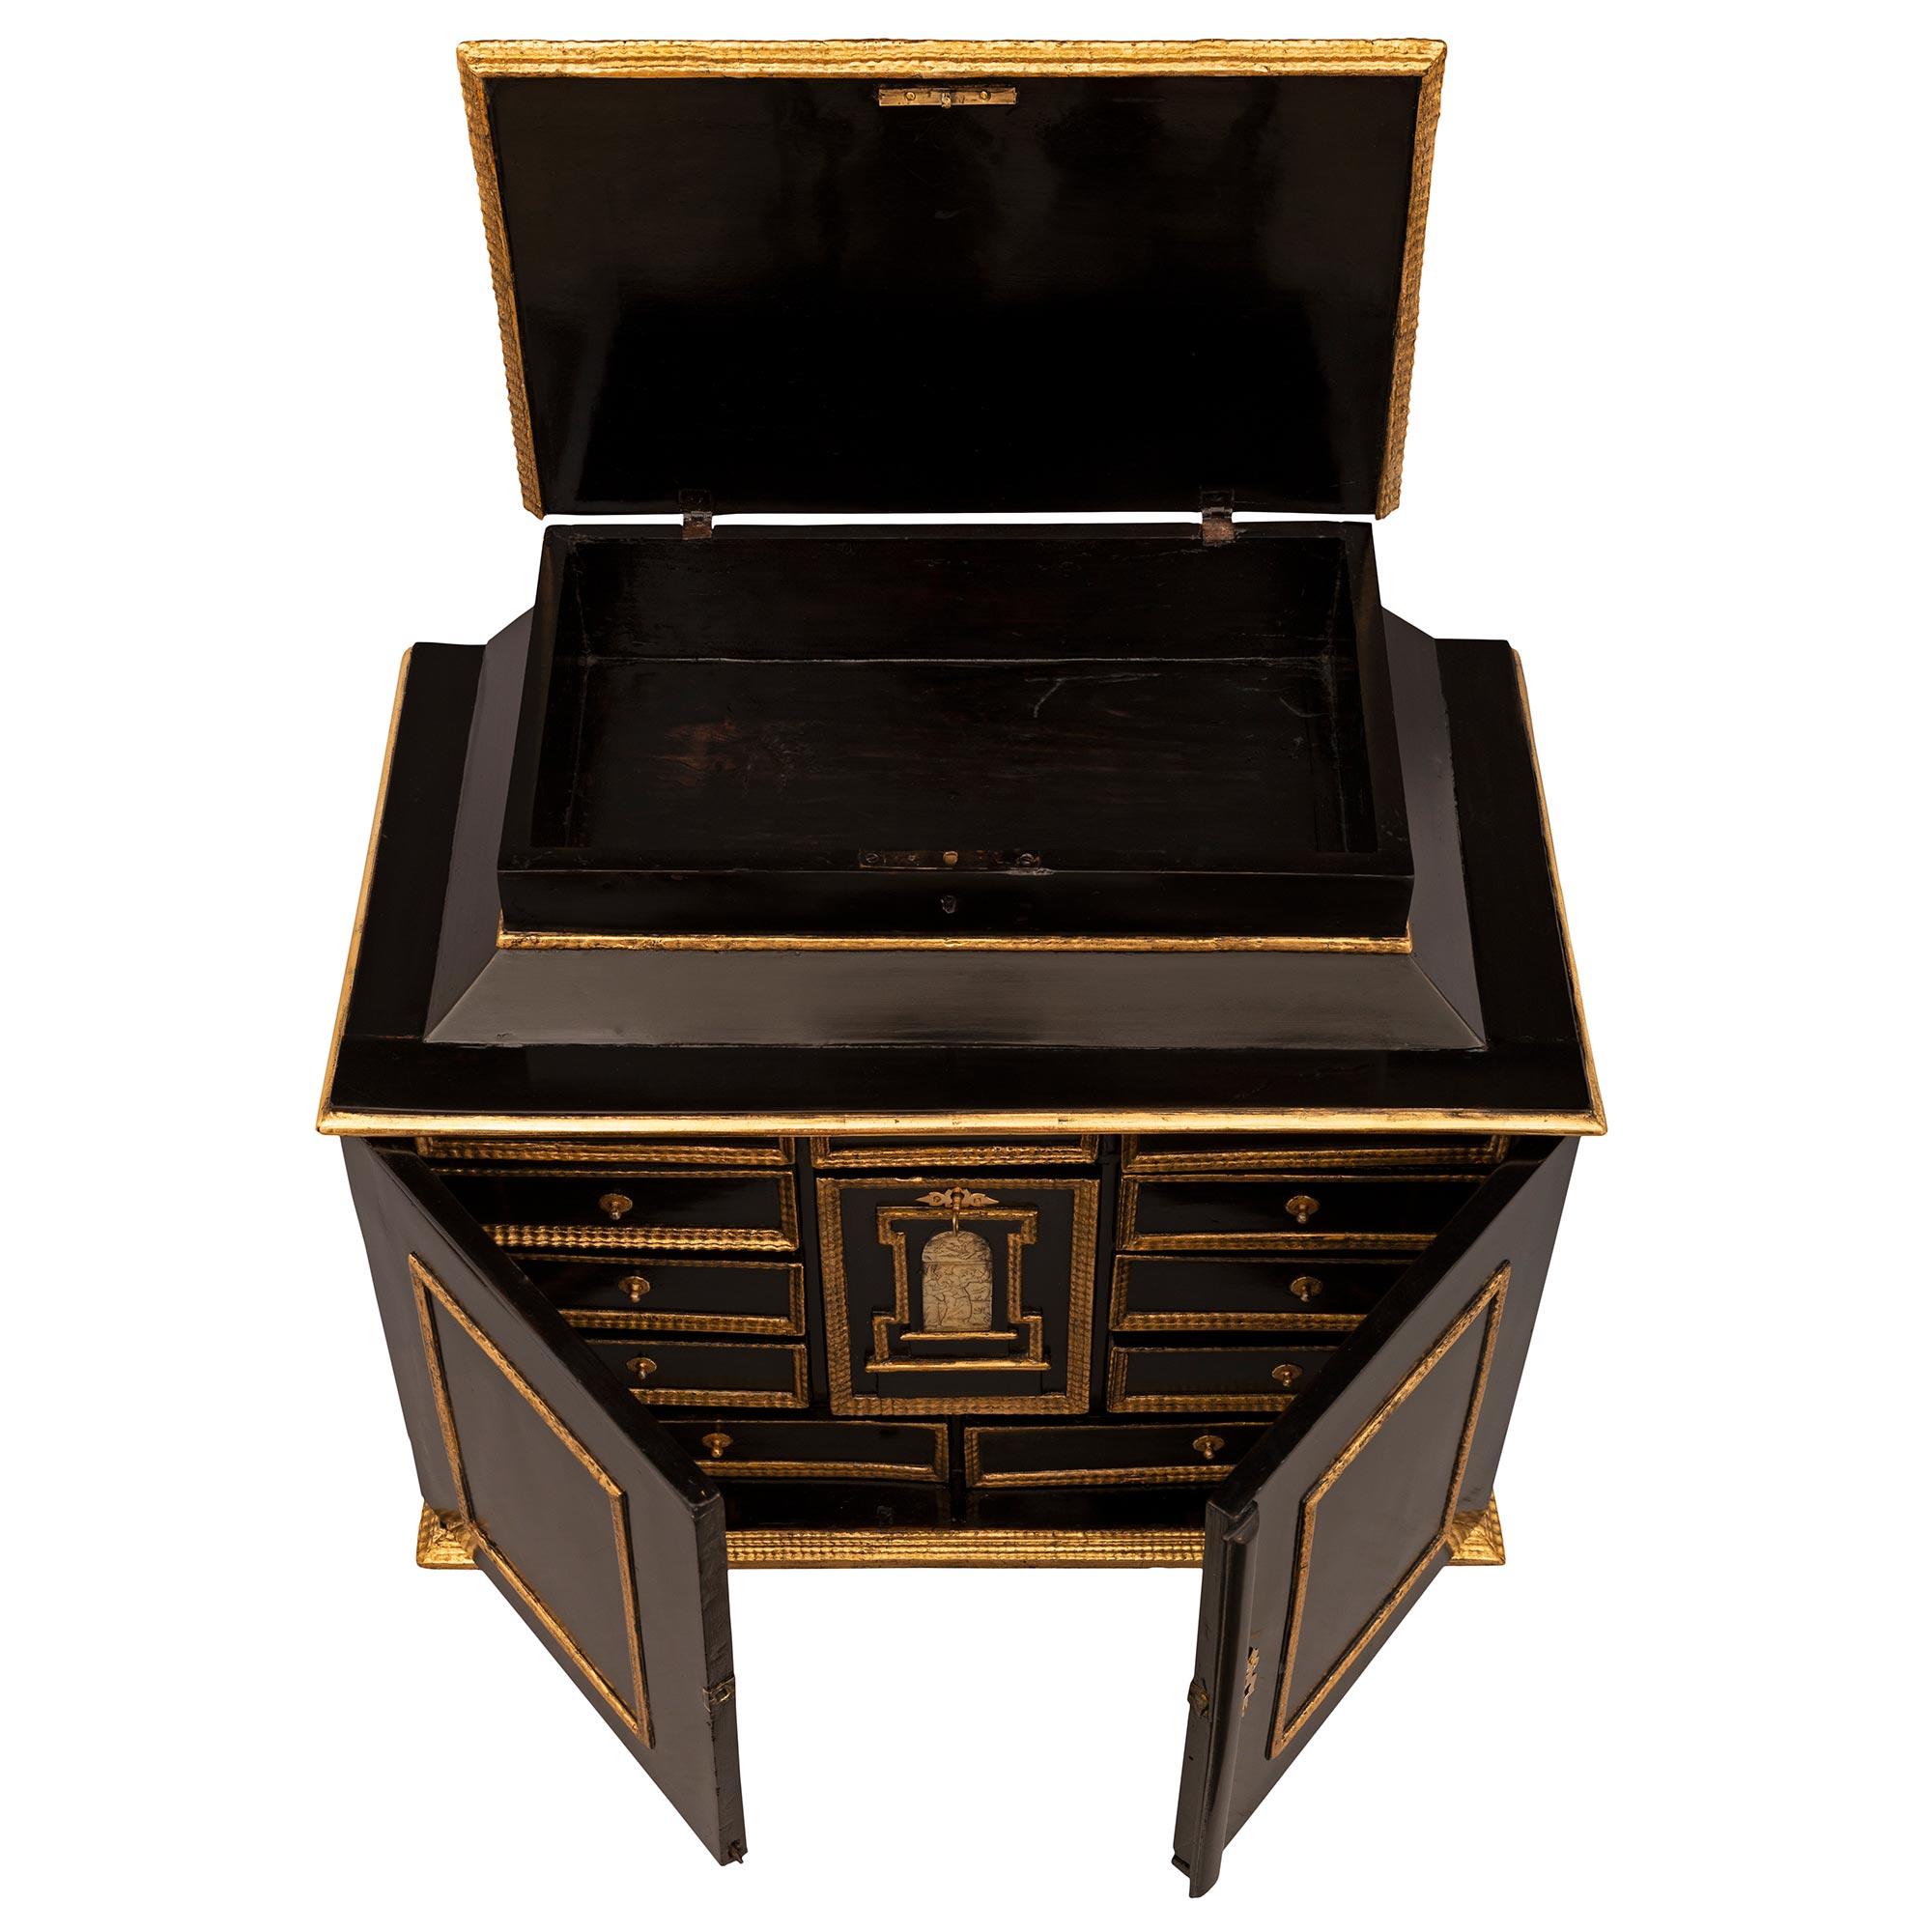 An exceptional and very unique Italian early 18th century Louis XIV period ebonized Fruitwood, bone, giltwood, and gilt metal specimen cabinet. The three door thirteen drawer cabinet is raised by an elegant mottled giltwood band with a most